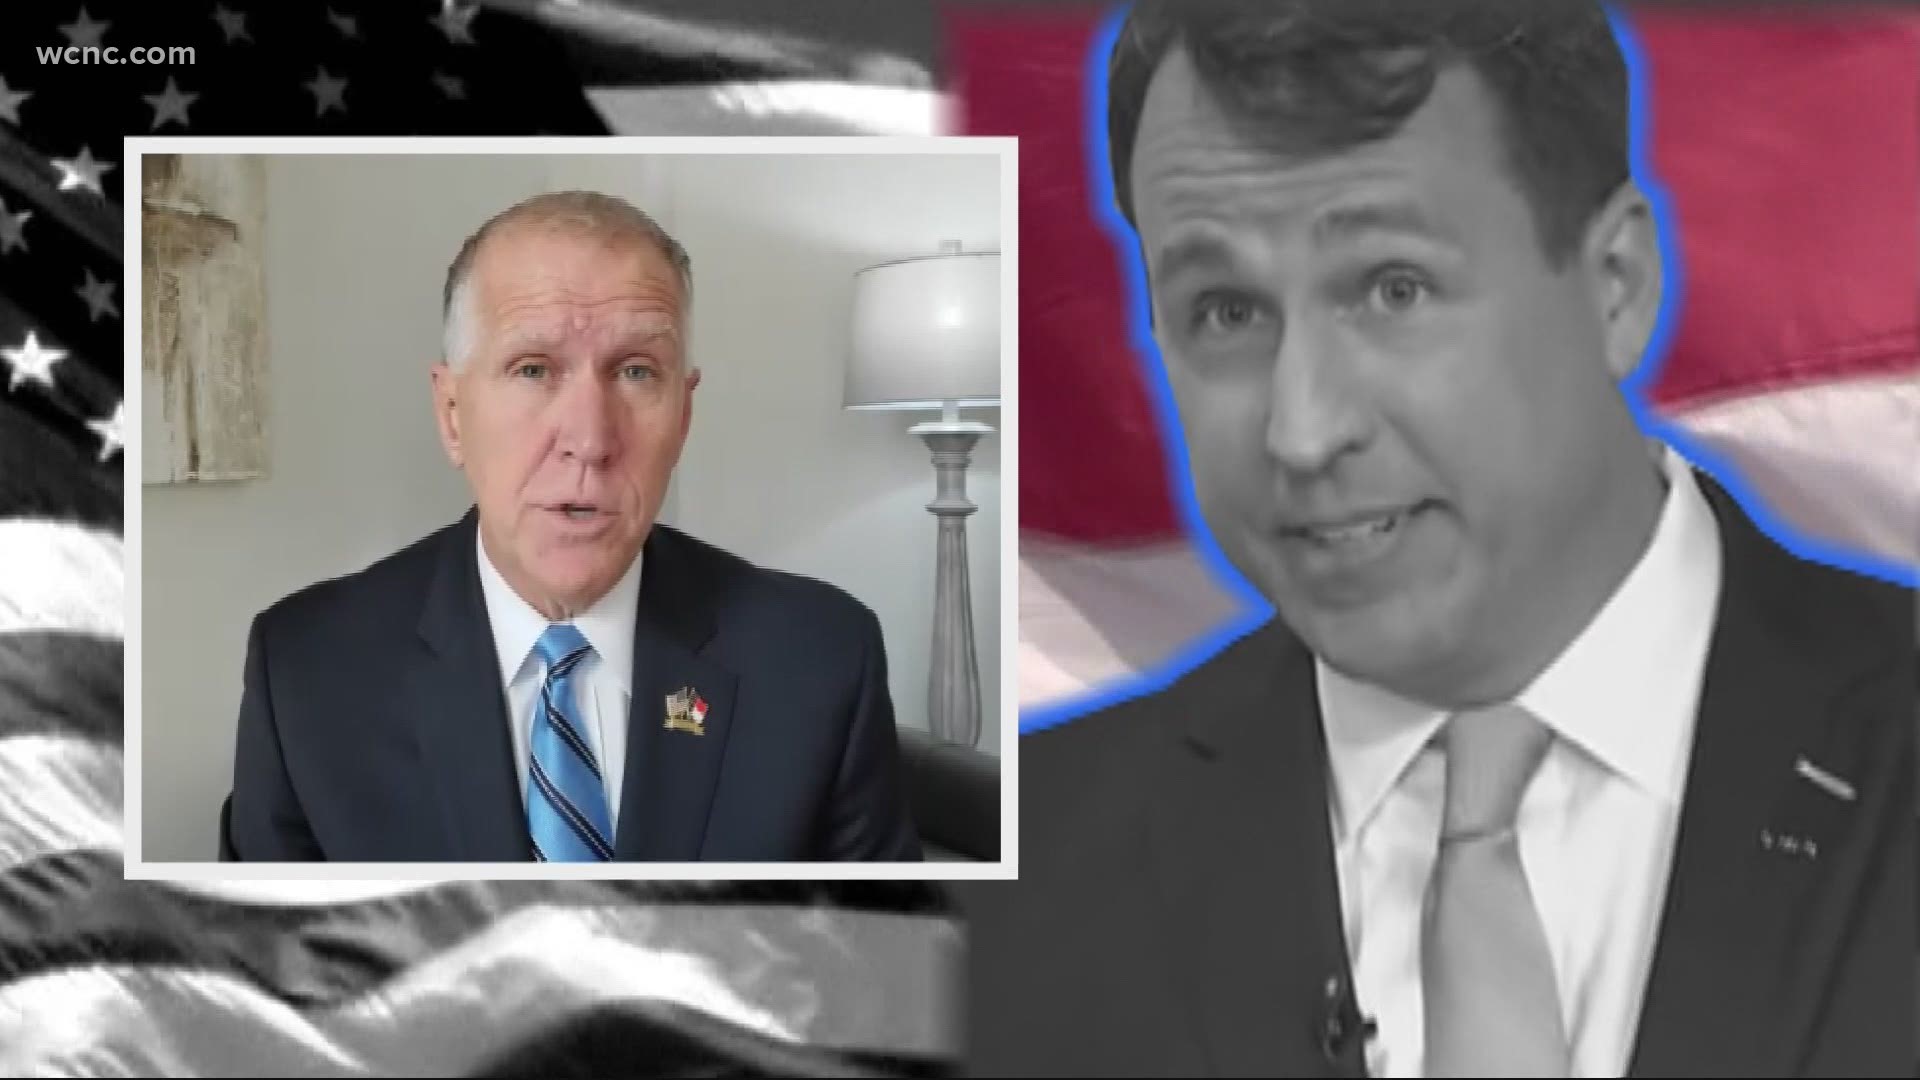 Cunningham says he's said all he's going to about his infidelity, but Tillis continues to demand an explanation with 14 days to go until election day.